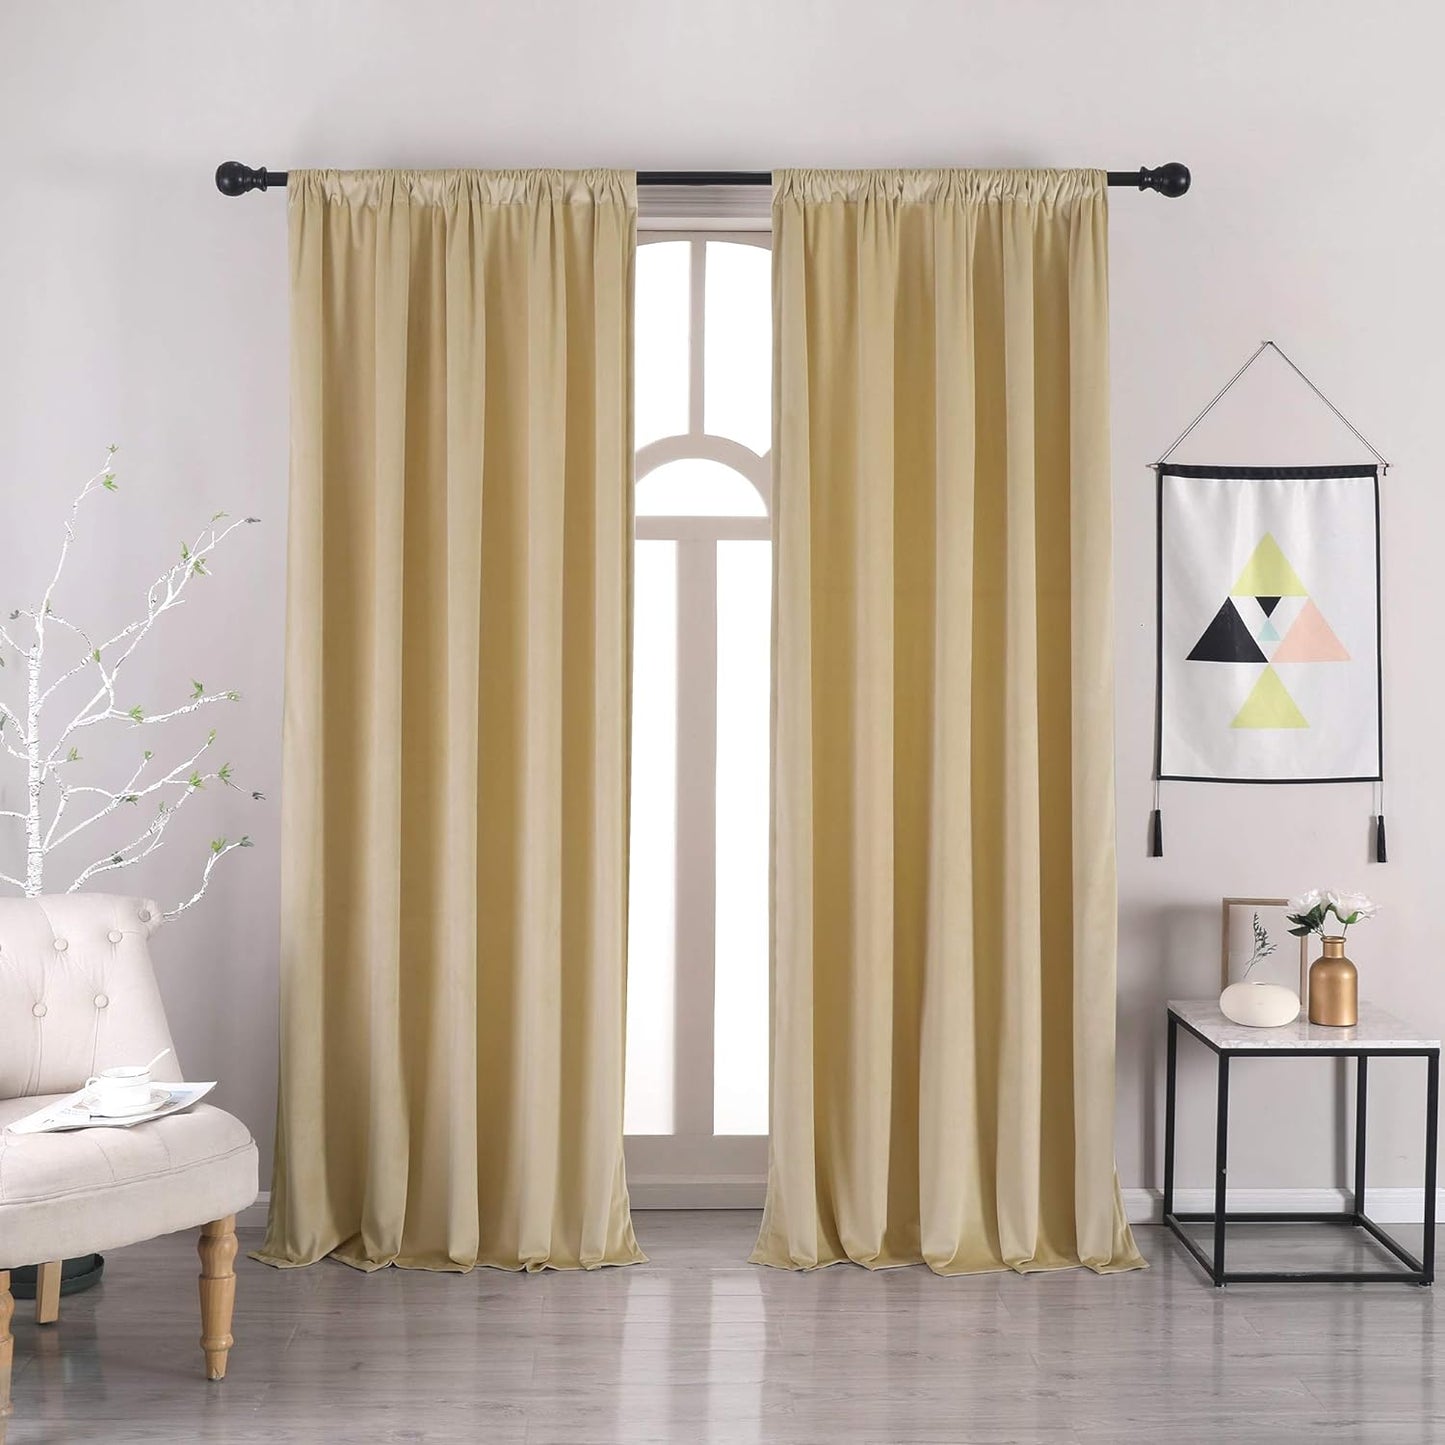 Nanbowang Green Velvet Curtains 63 Inches Long Dark Green Light Blocking Rod Pocket Window Curtain Panels Set of 2 Heat Insulated Curtains Thermal Curtain Panels for Bedroom  nanbowang Beige 42"X63" 